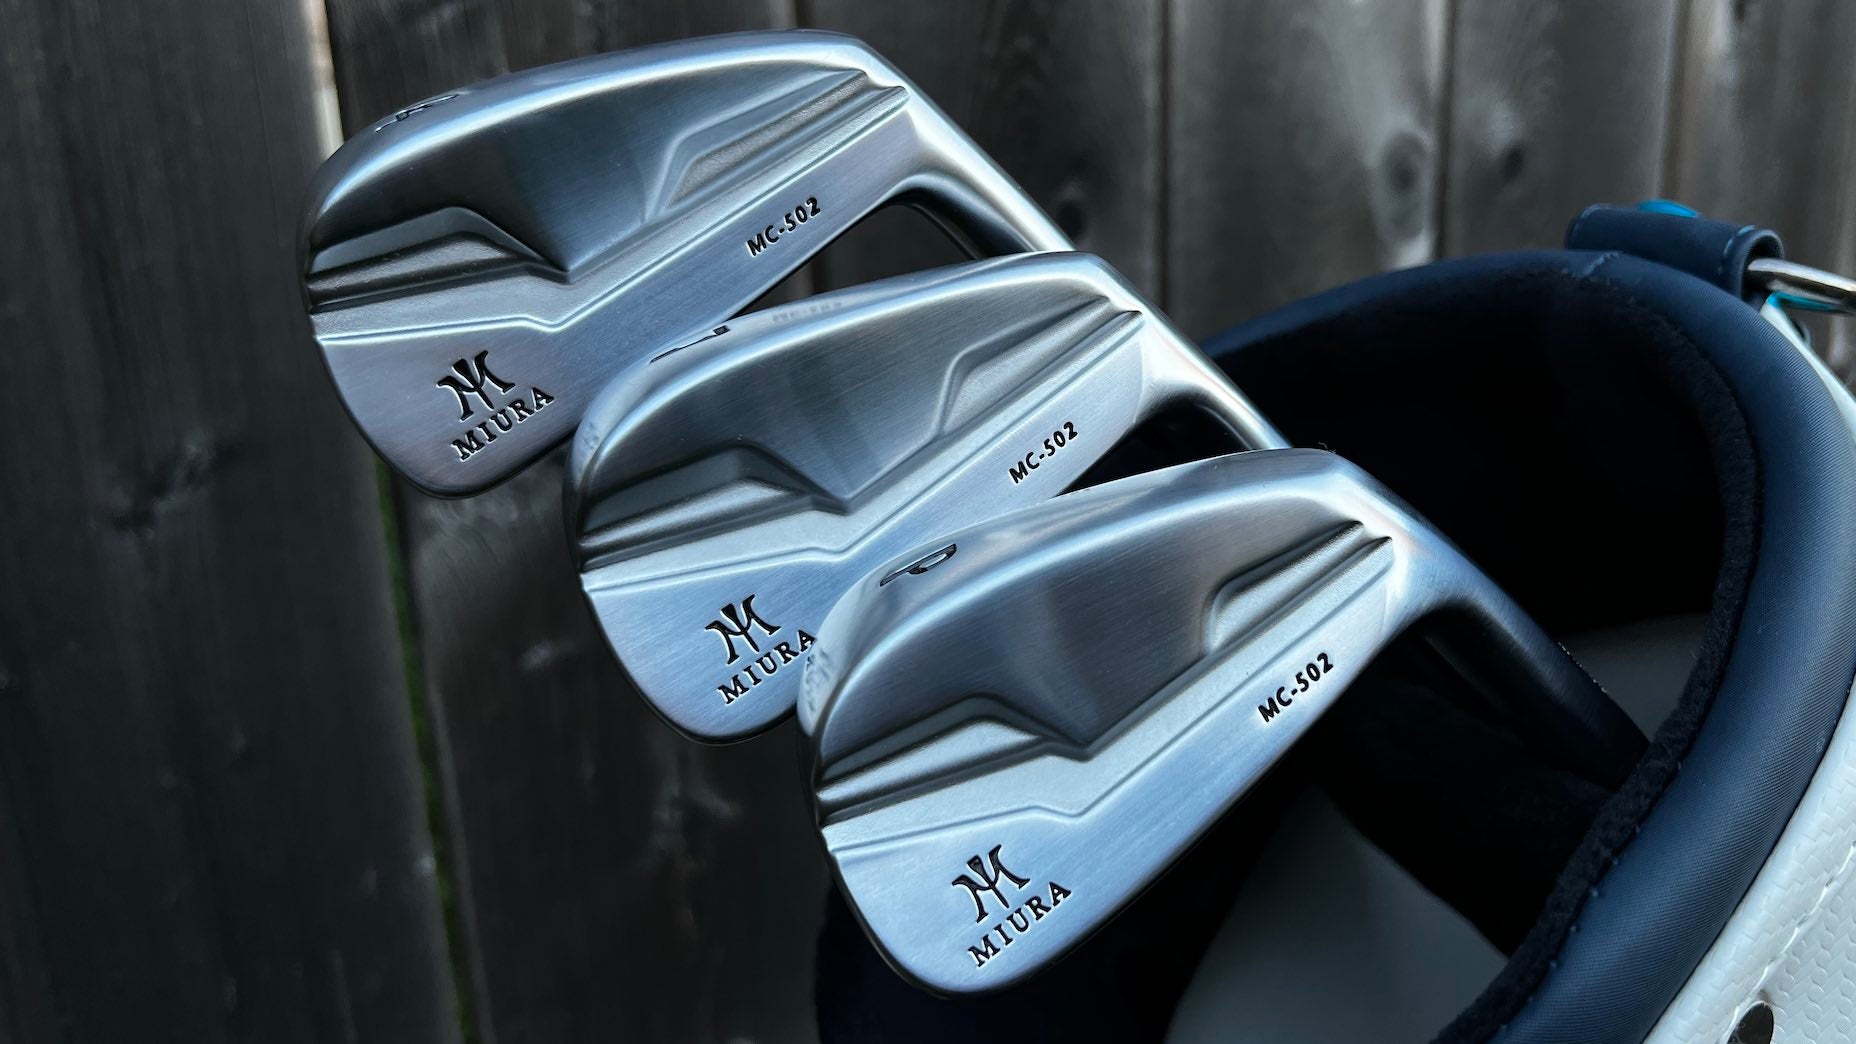 Miura's new MC-502 forged irons pair performance with playability